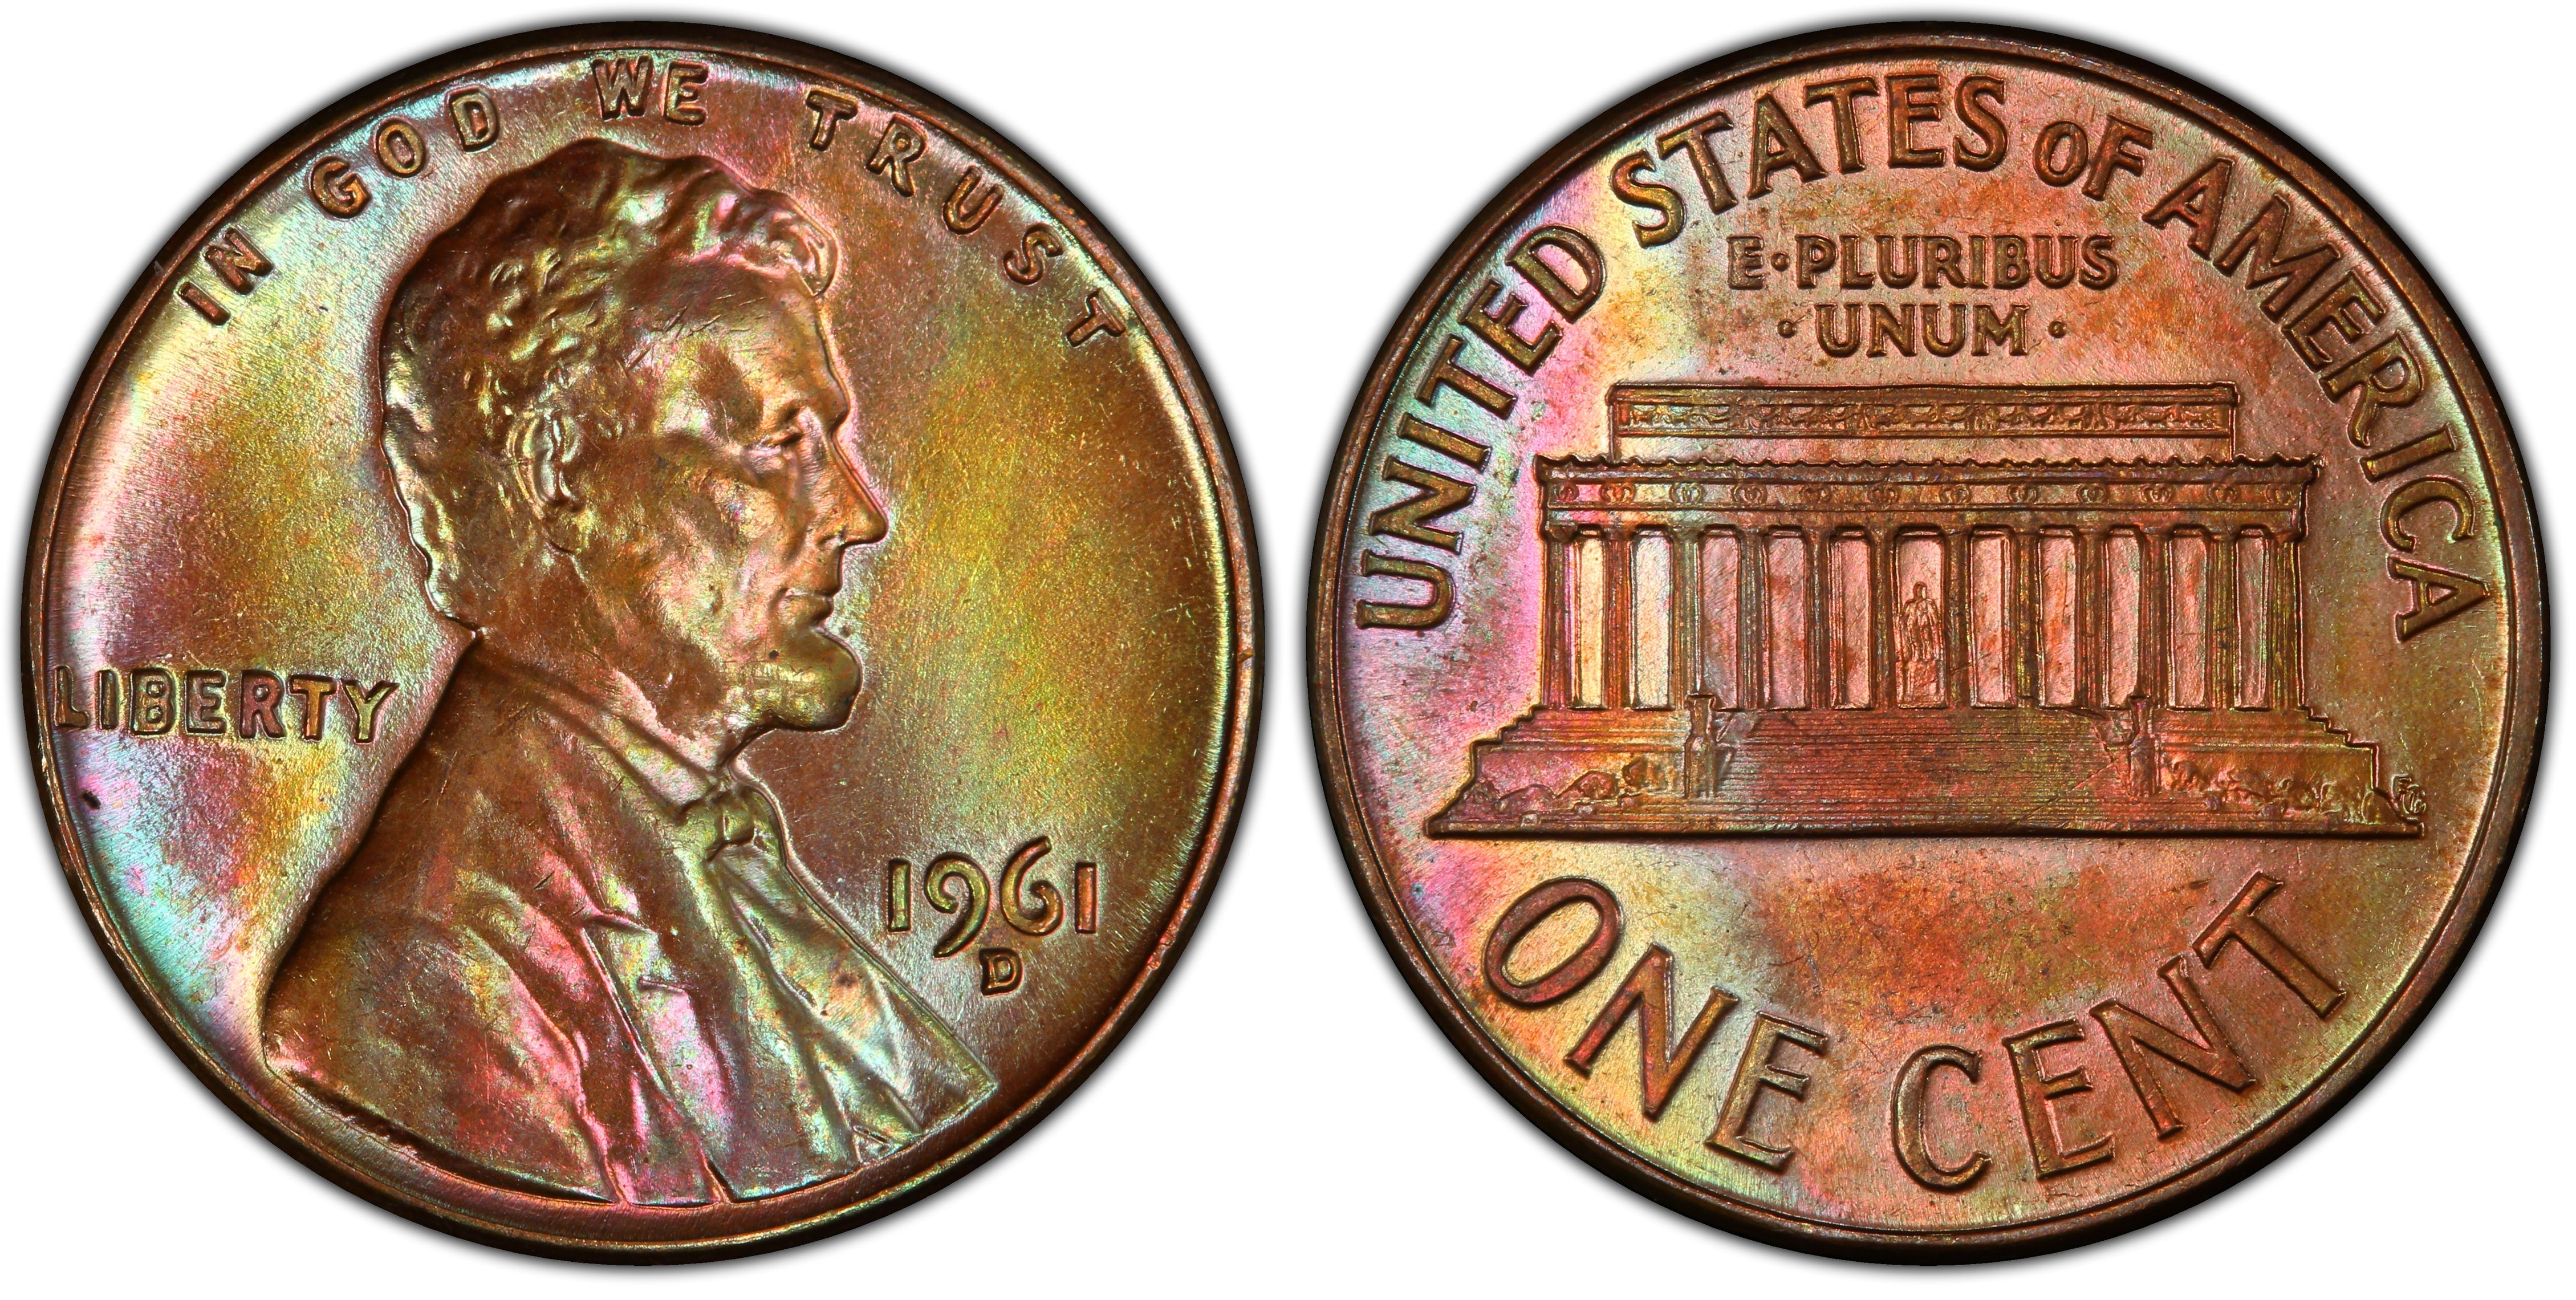 1964 SMS Lincoln Cent, MS66RD PCGS, Great Rarity - VDB Coins